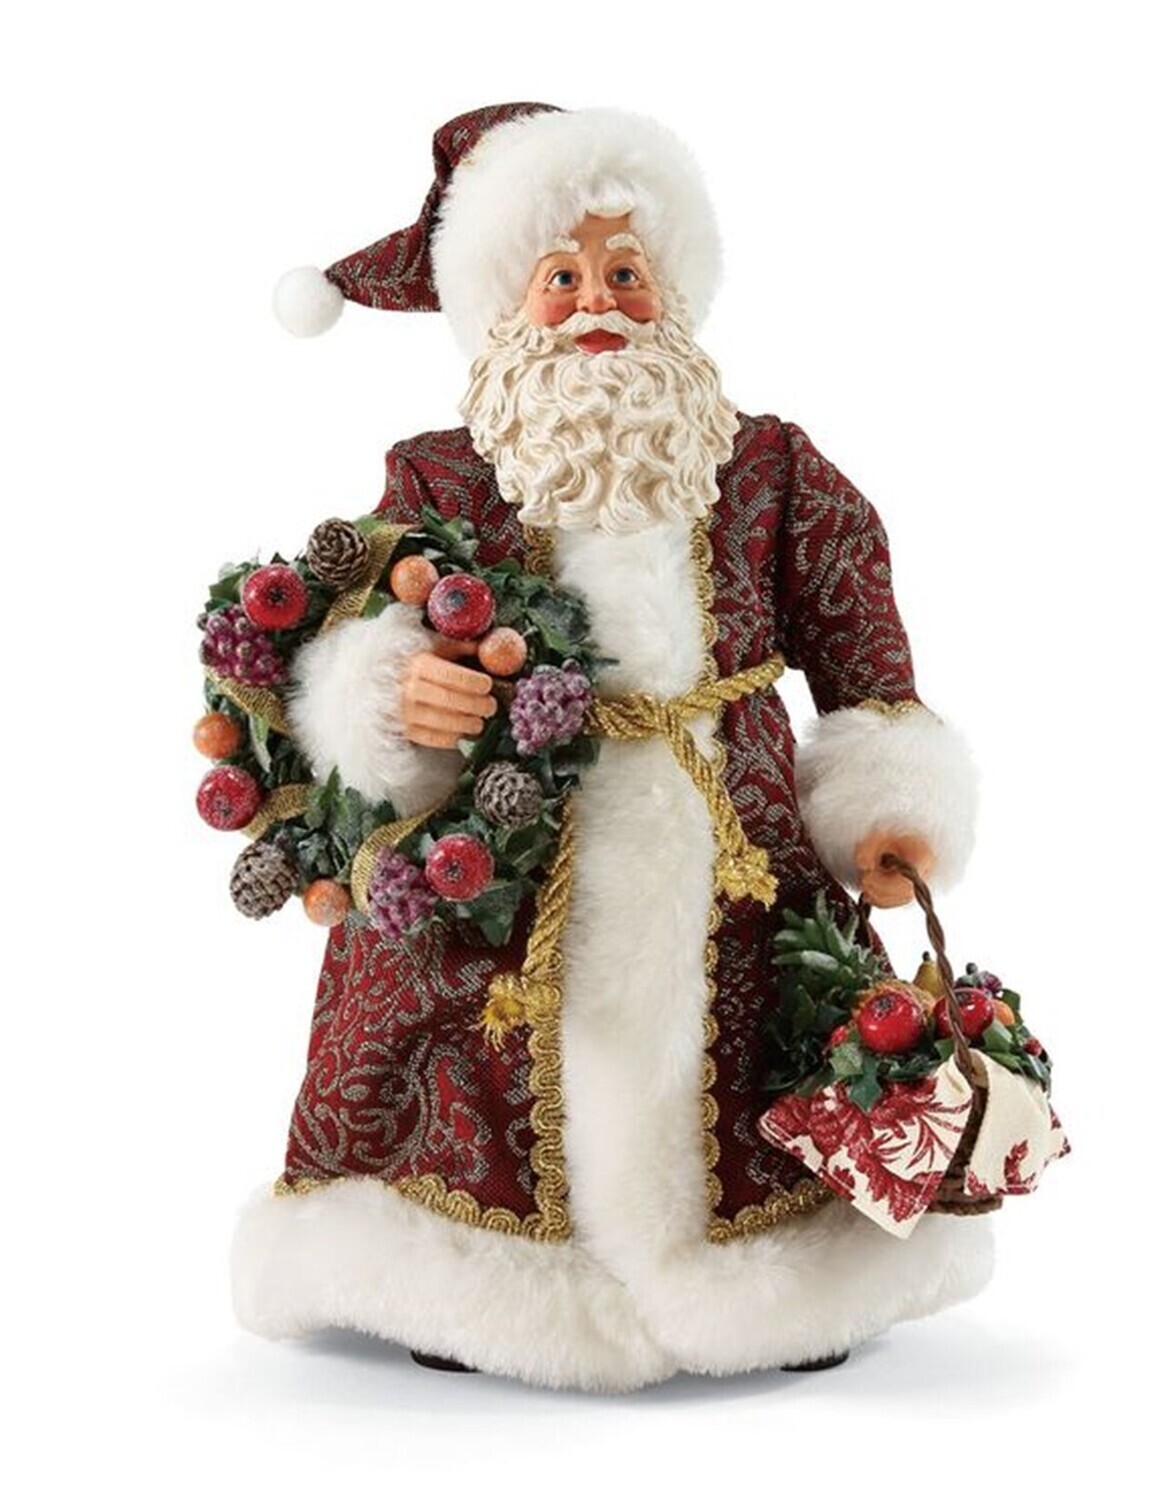 Possible Dreams 11” Santa with Wreath "Day of Mirth" Figurine (4055554)